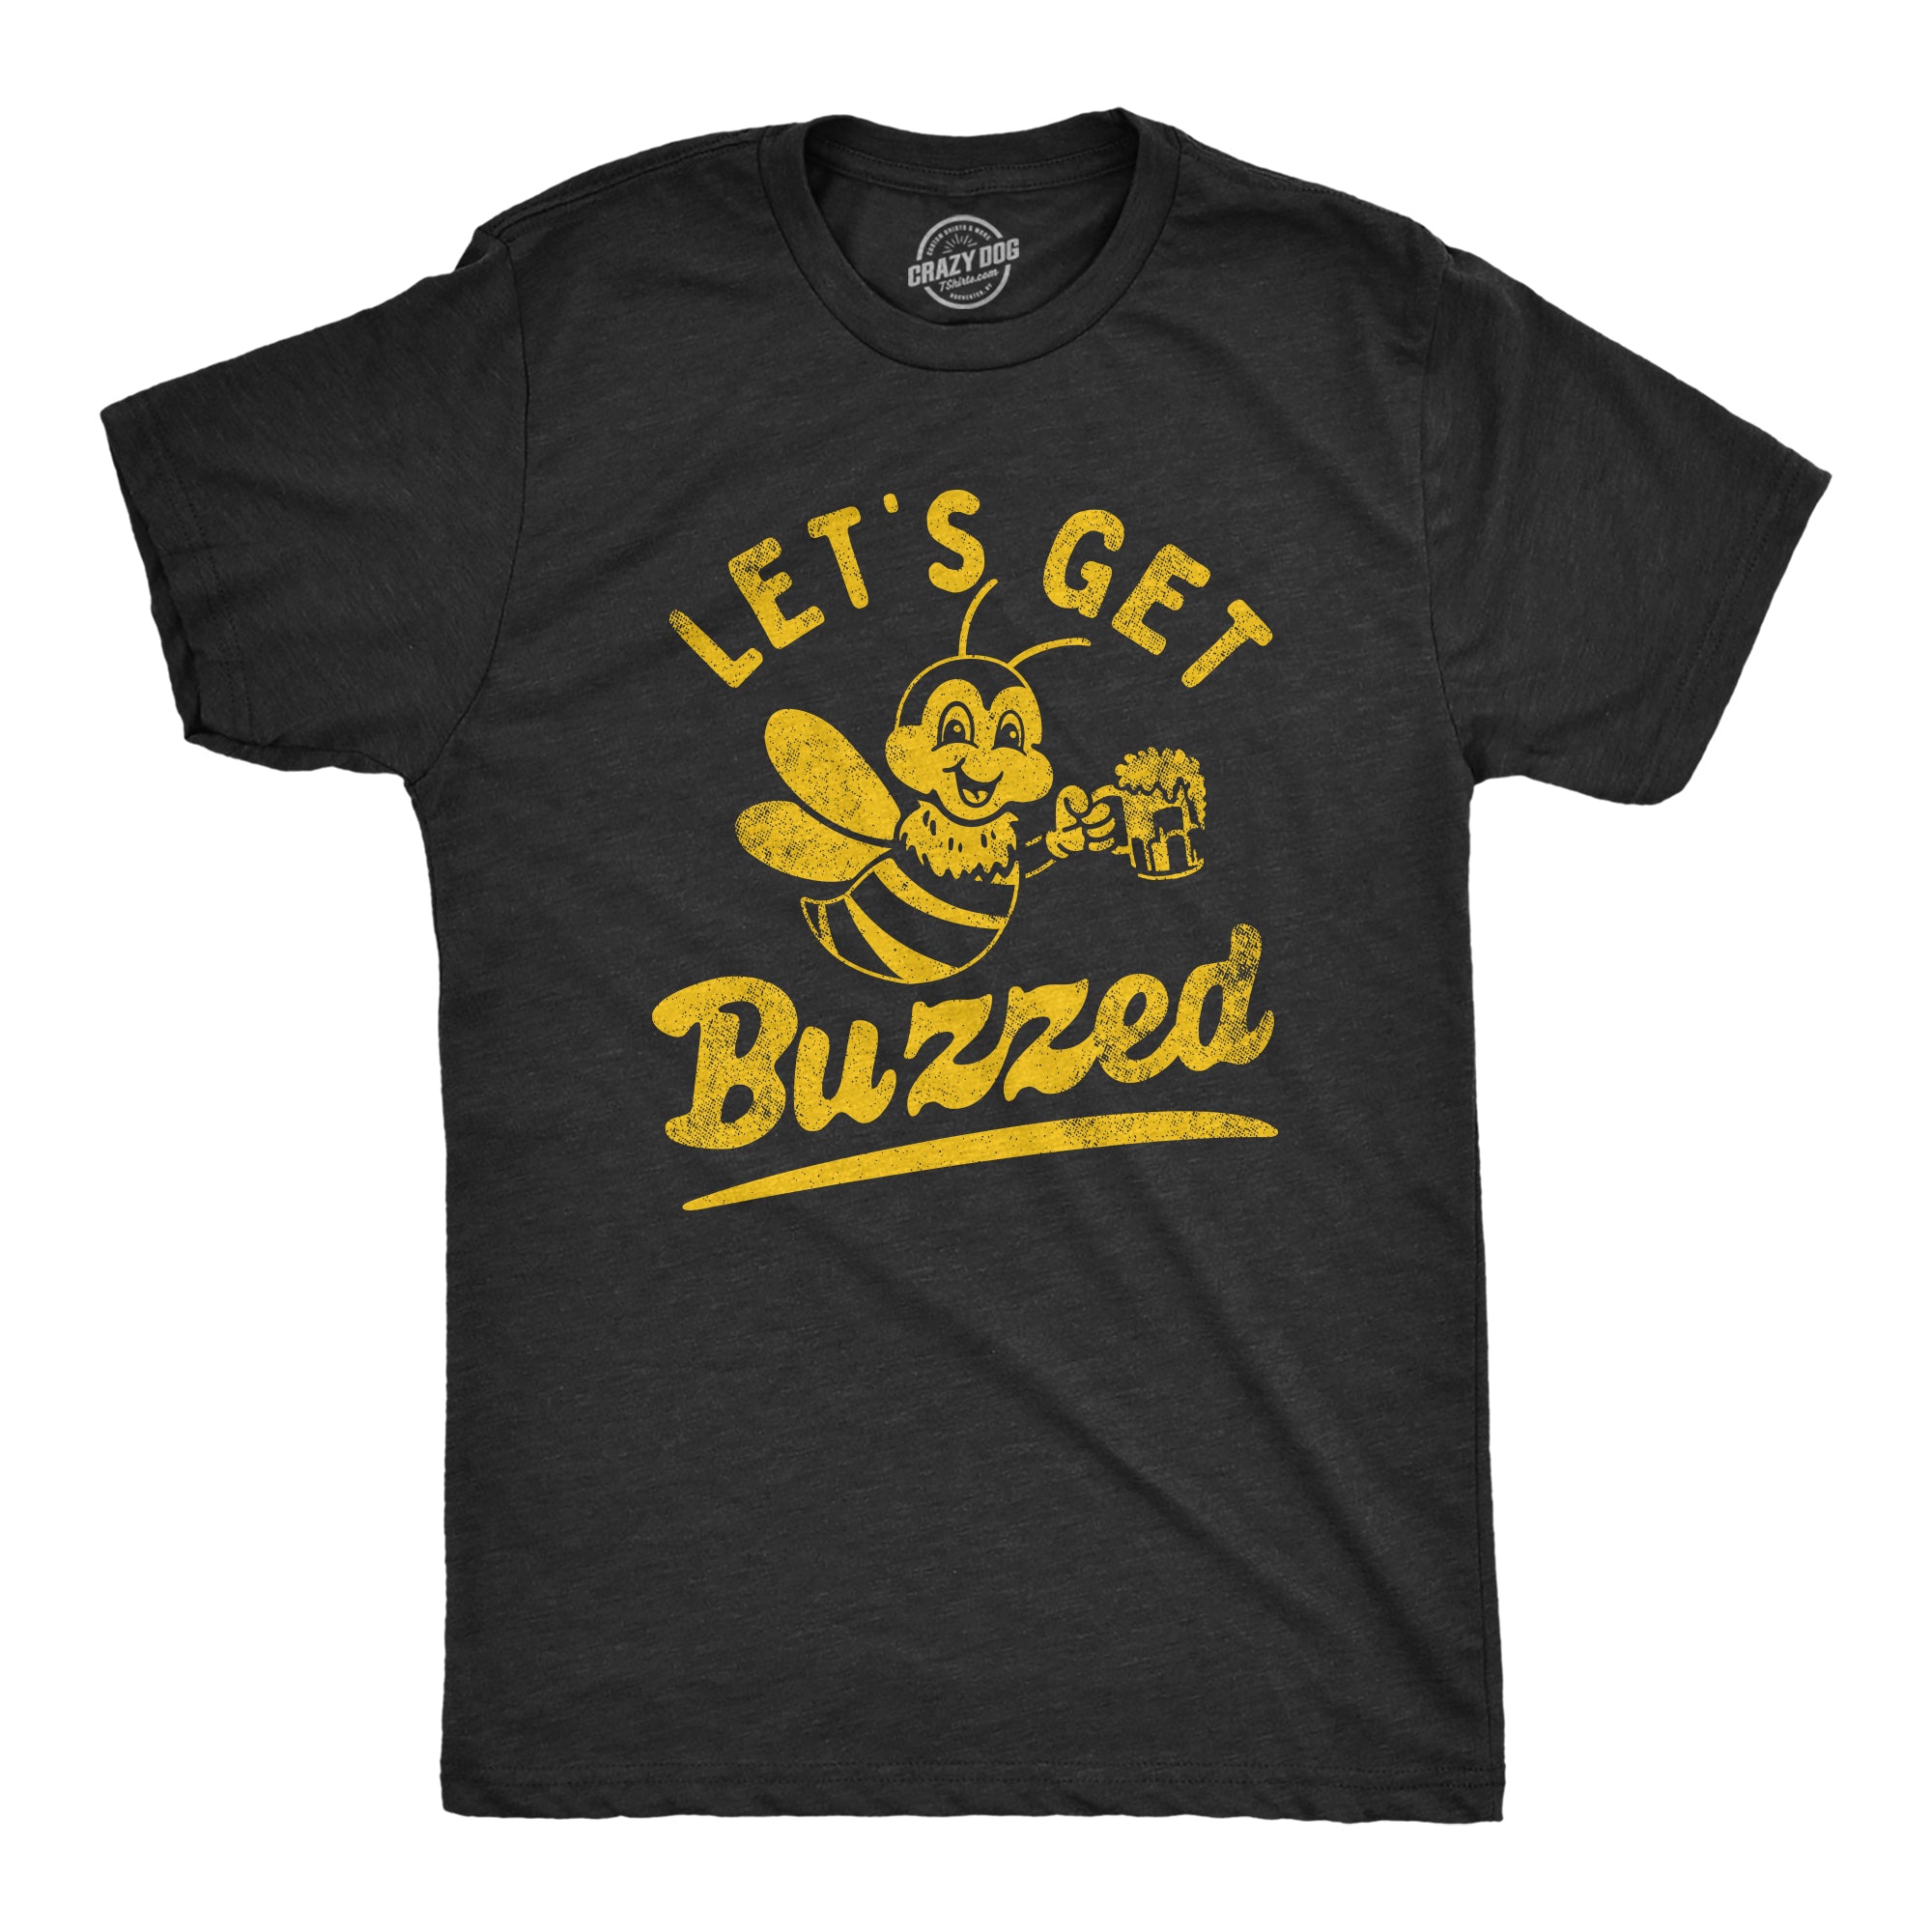 Funny Heather Black - BUZZED Lets Get Buzzed Mens T Shirt Nerdy Drinking sarcastic Tee